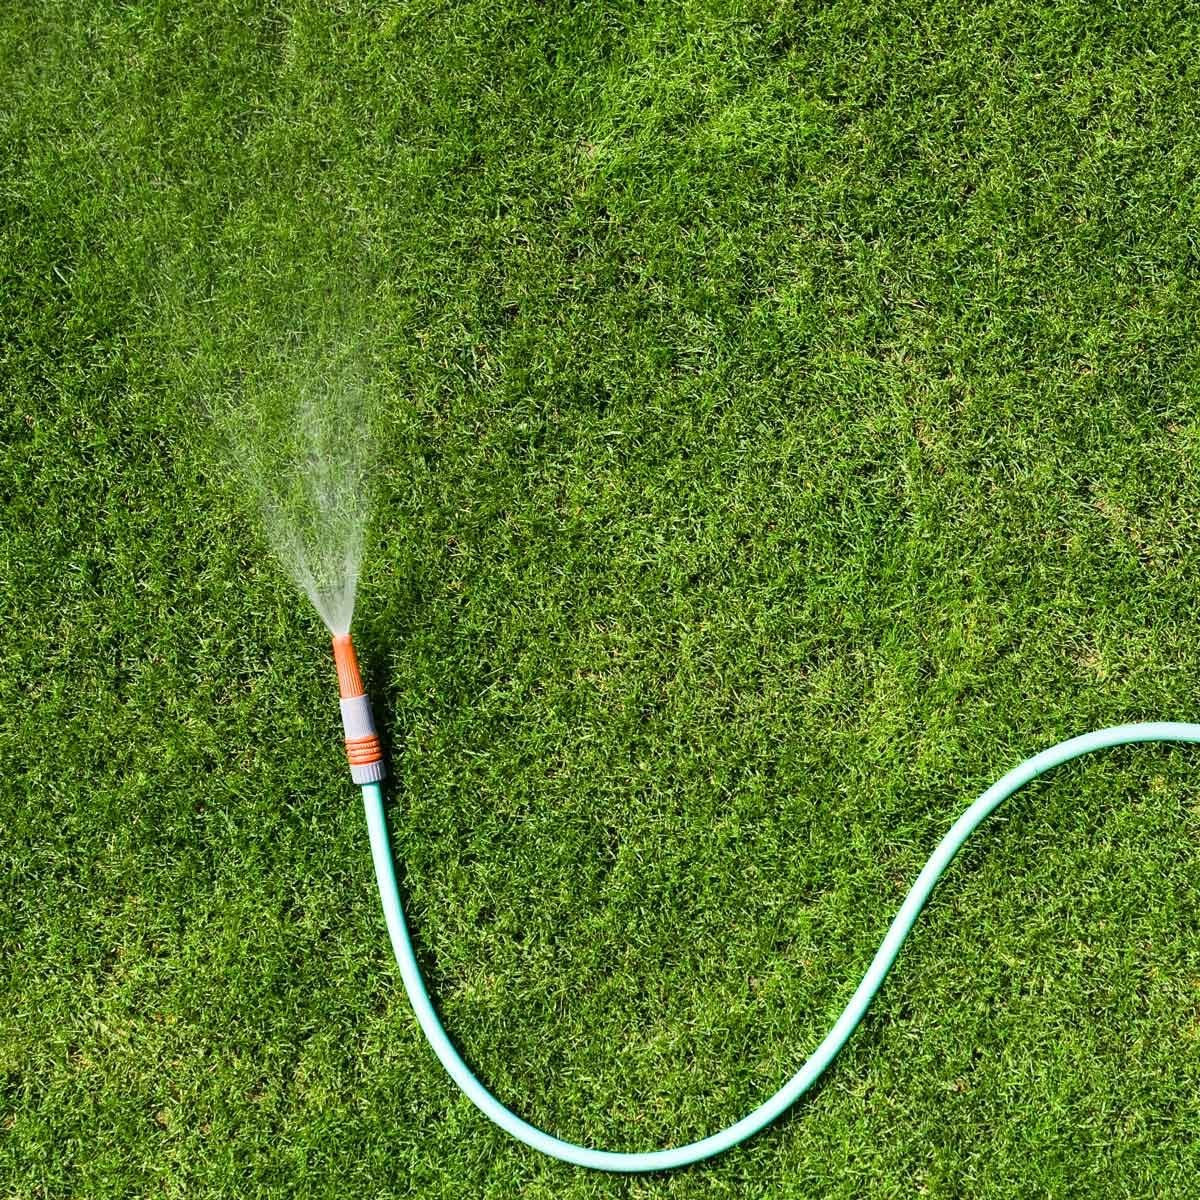 When Is the Best Time to Water the Grass?